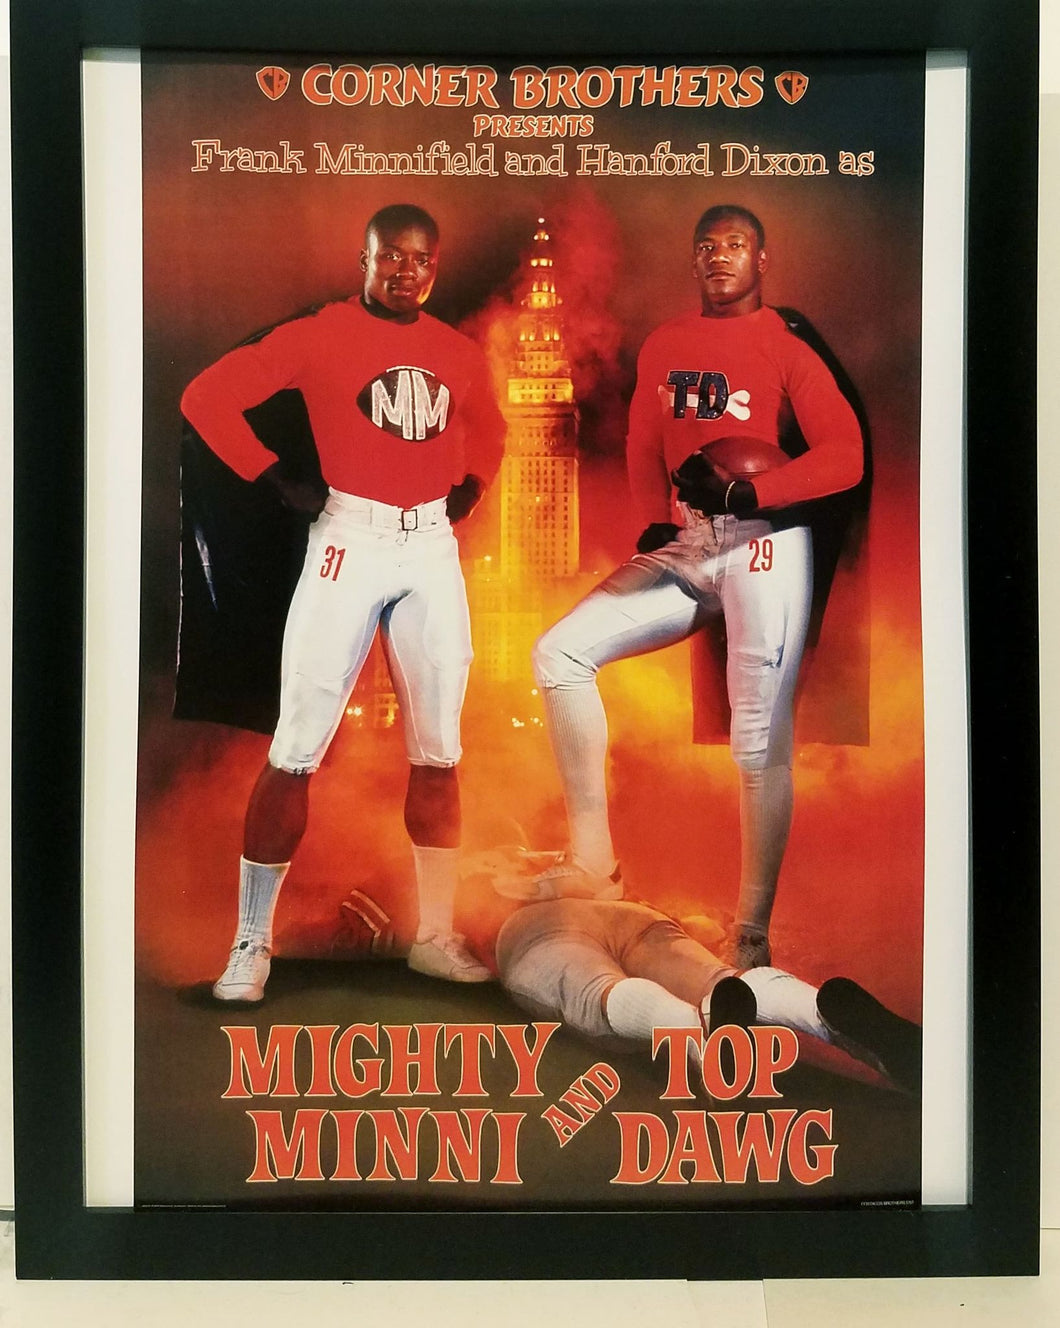 Minnifield & Dixon Browns Costacos Brothers 8.5x11 FRAMED Print Vintage 80s Poster